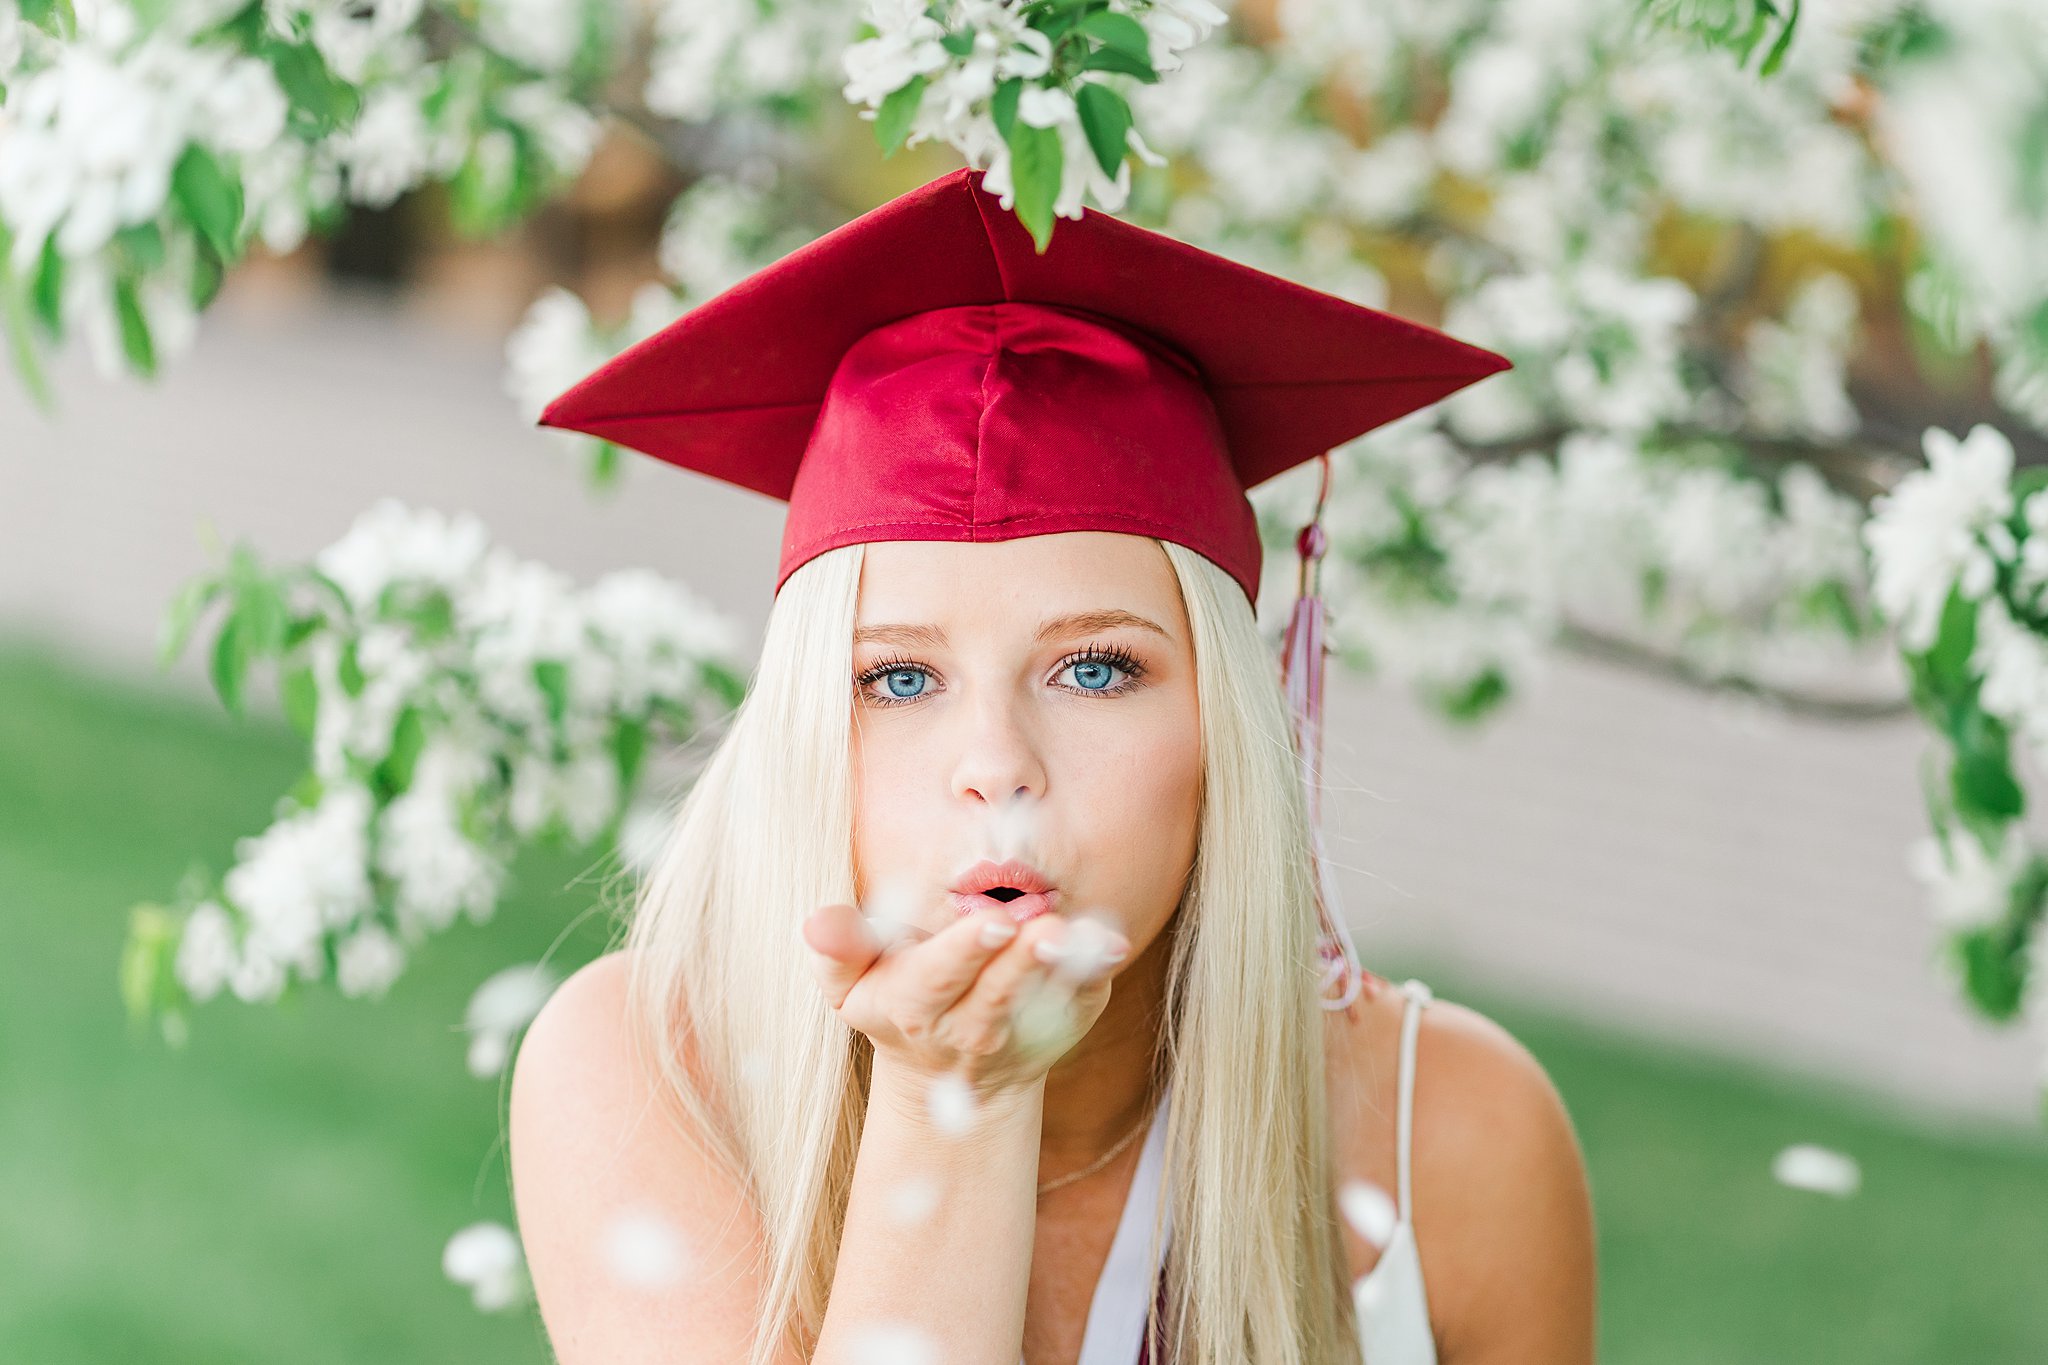 girl wearing graduation cap blows flowers in front of her act prep rochester MN